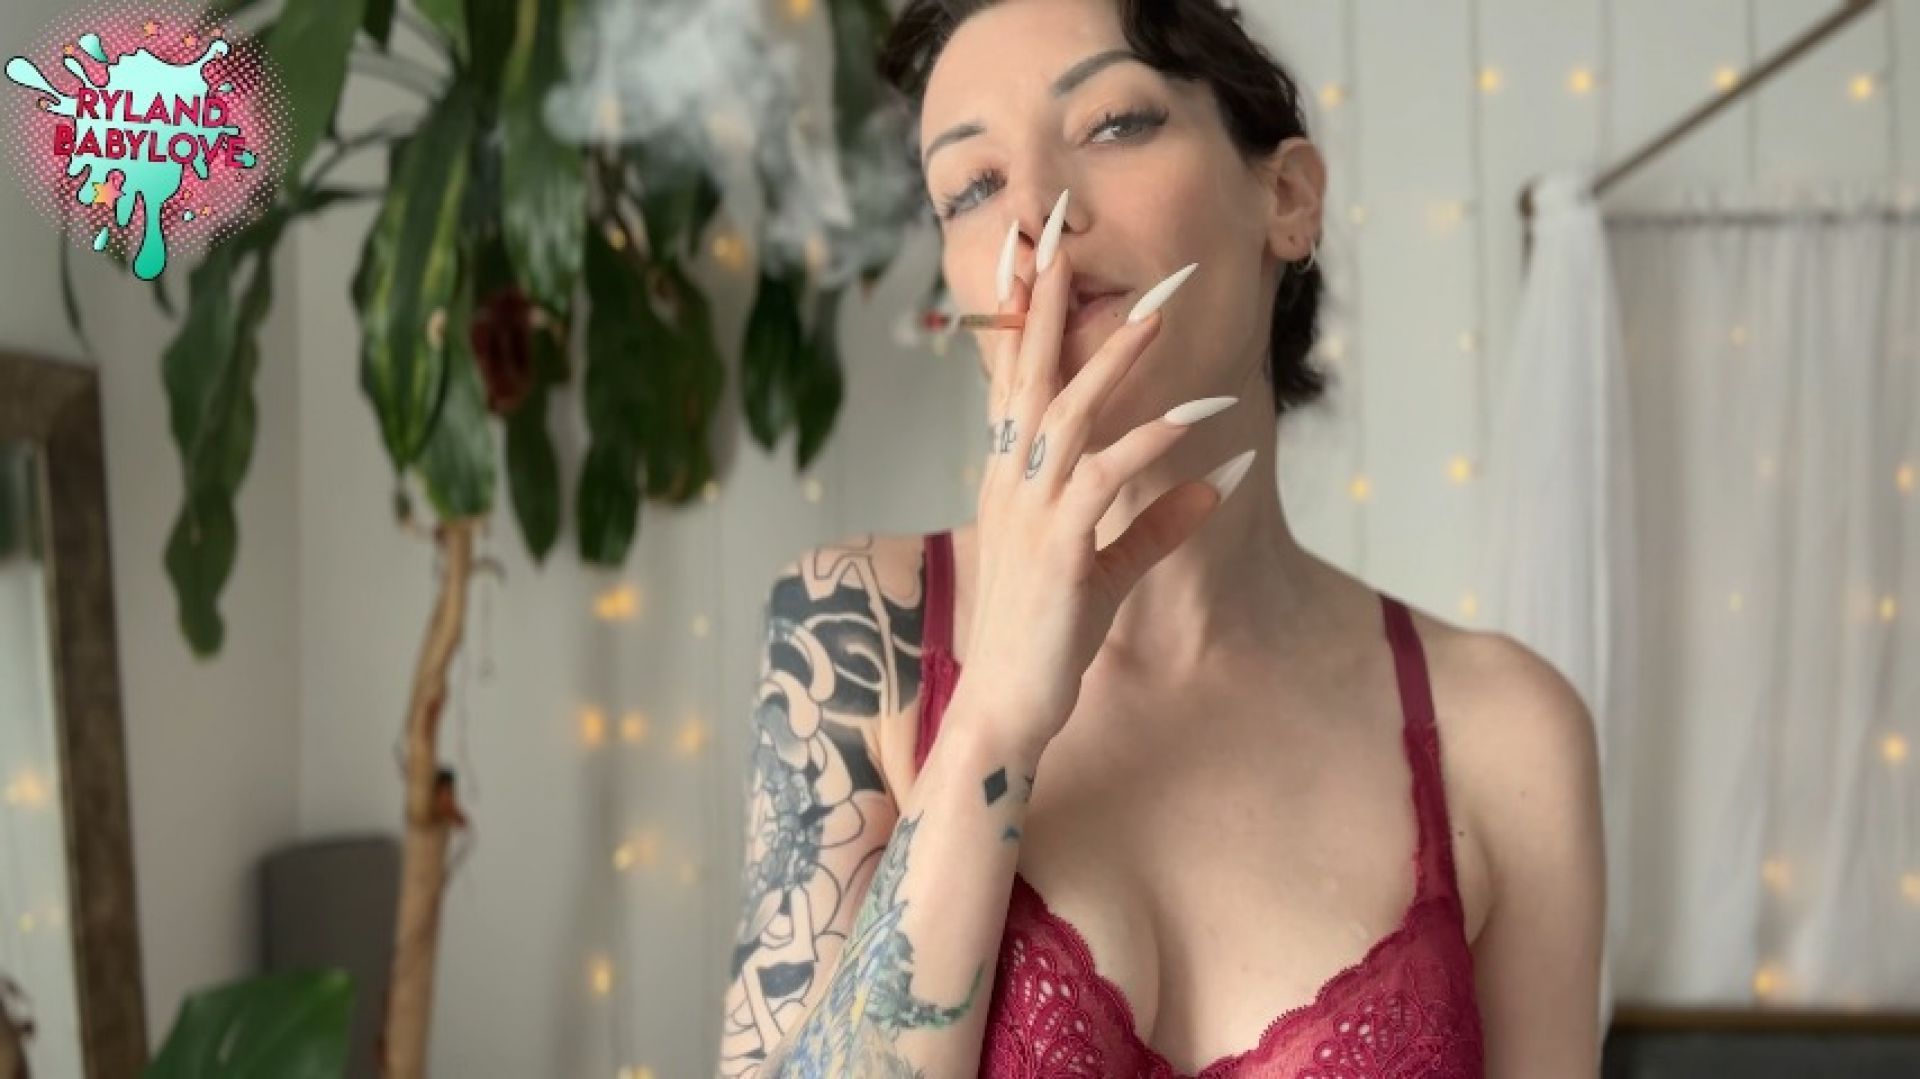 SFW Smoking Joint Long Nails Red Lingerie